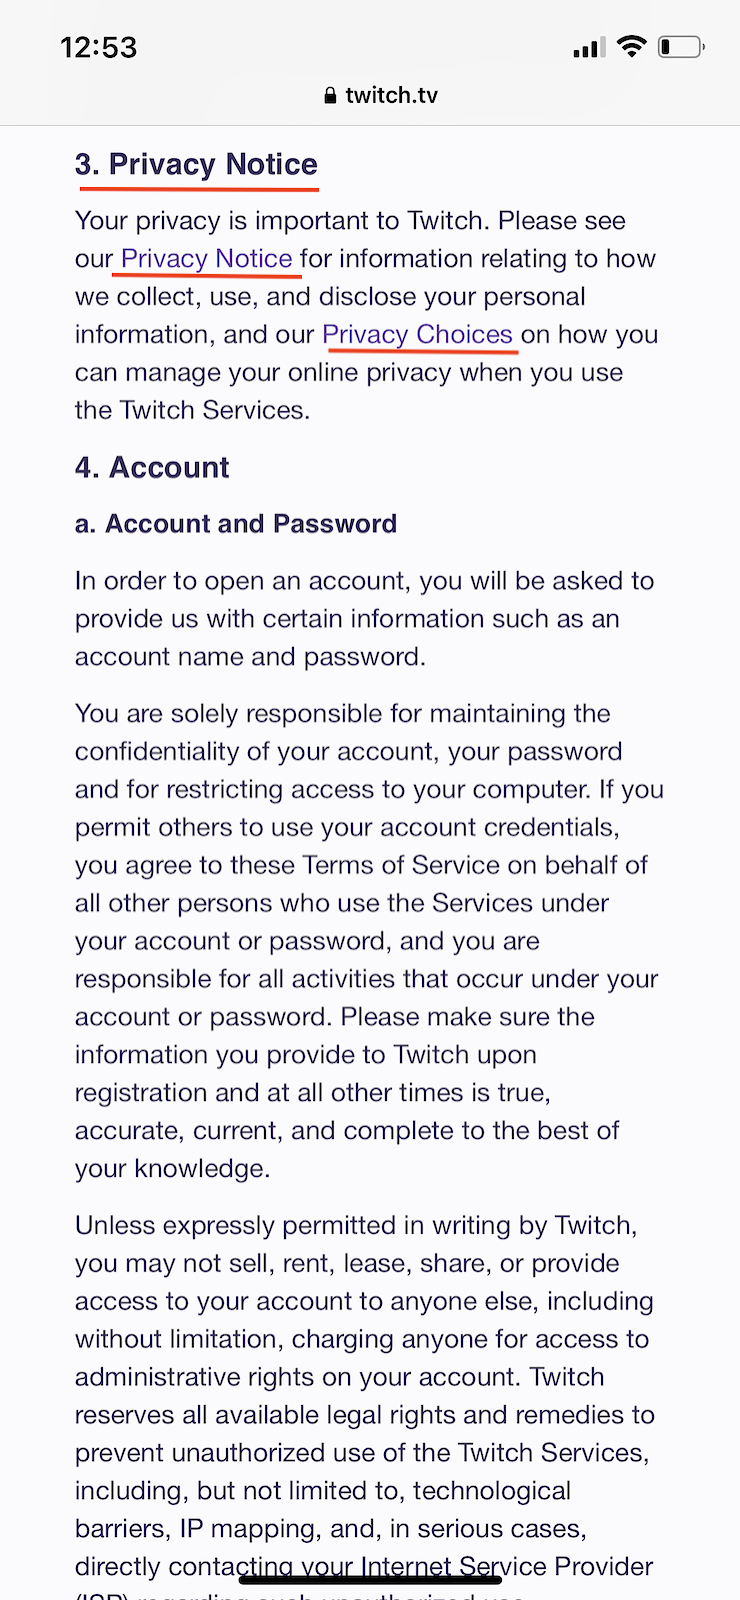 Twitch-link-privacy-policy-app-terms-and-conditions-agreement